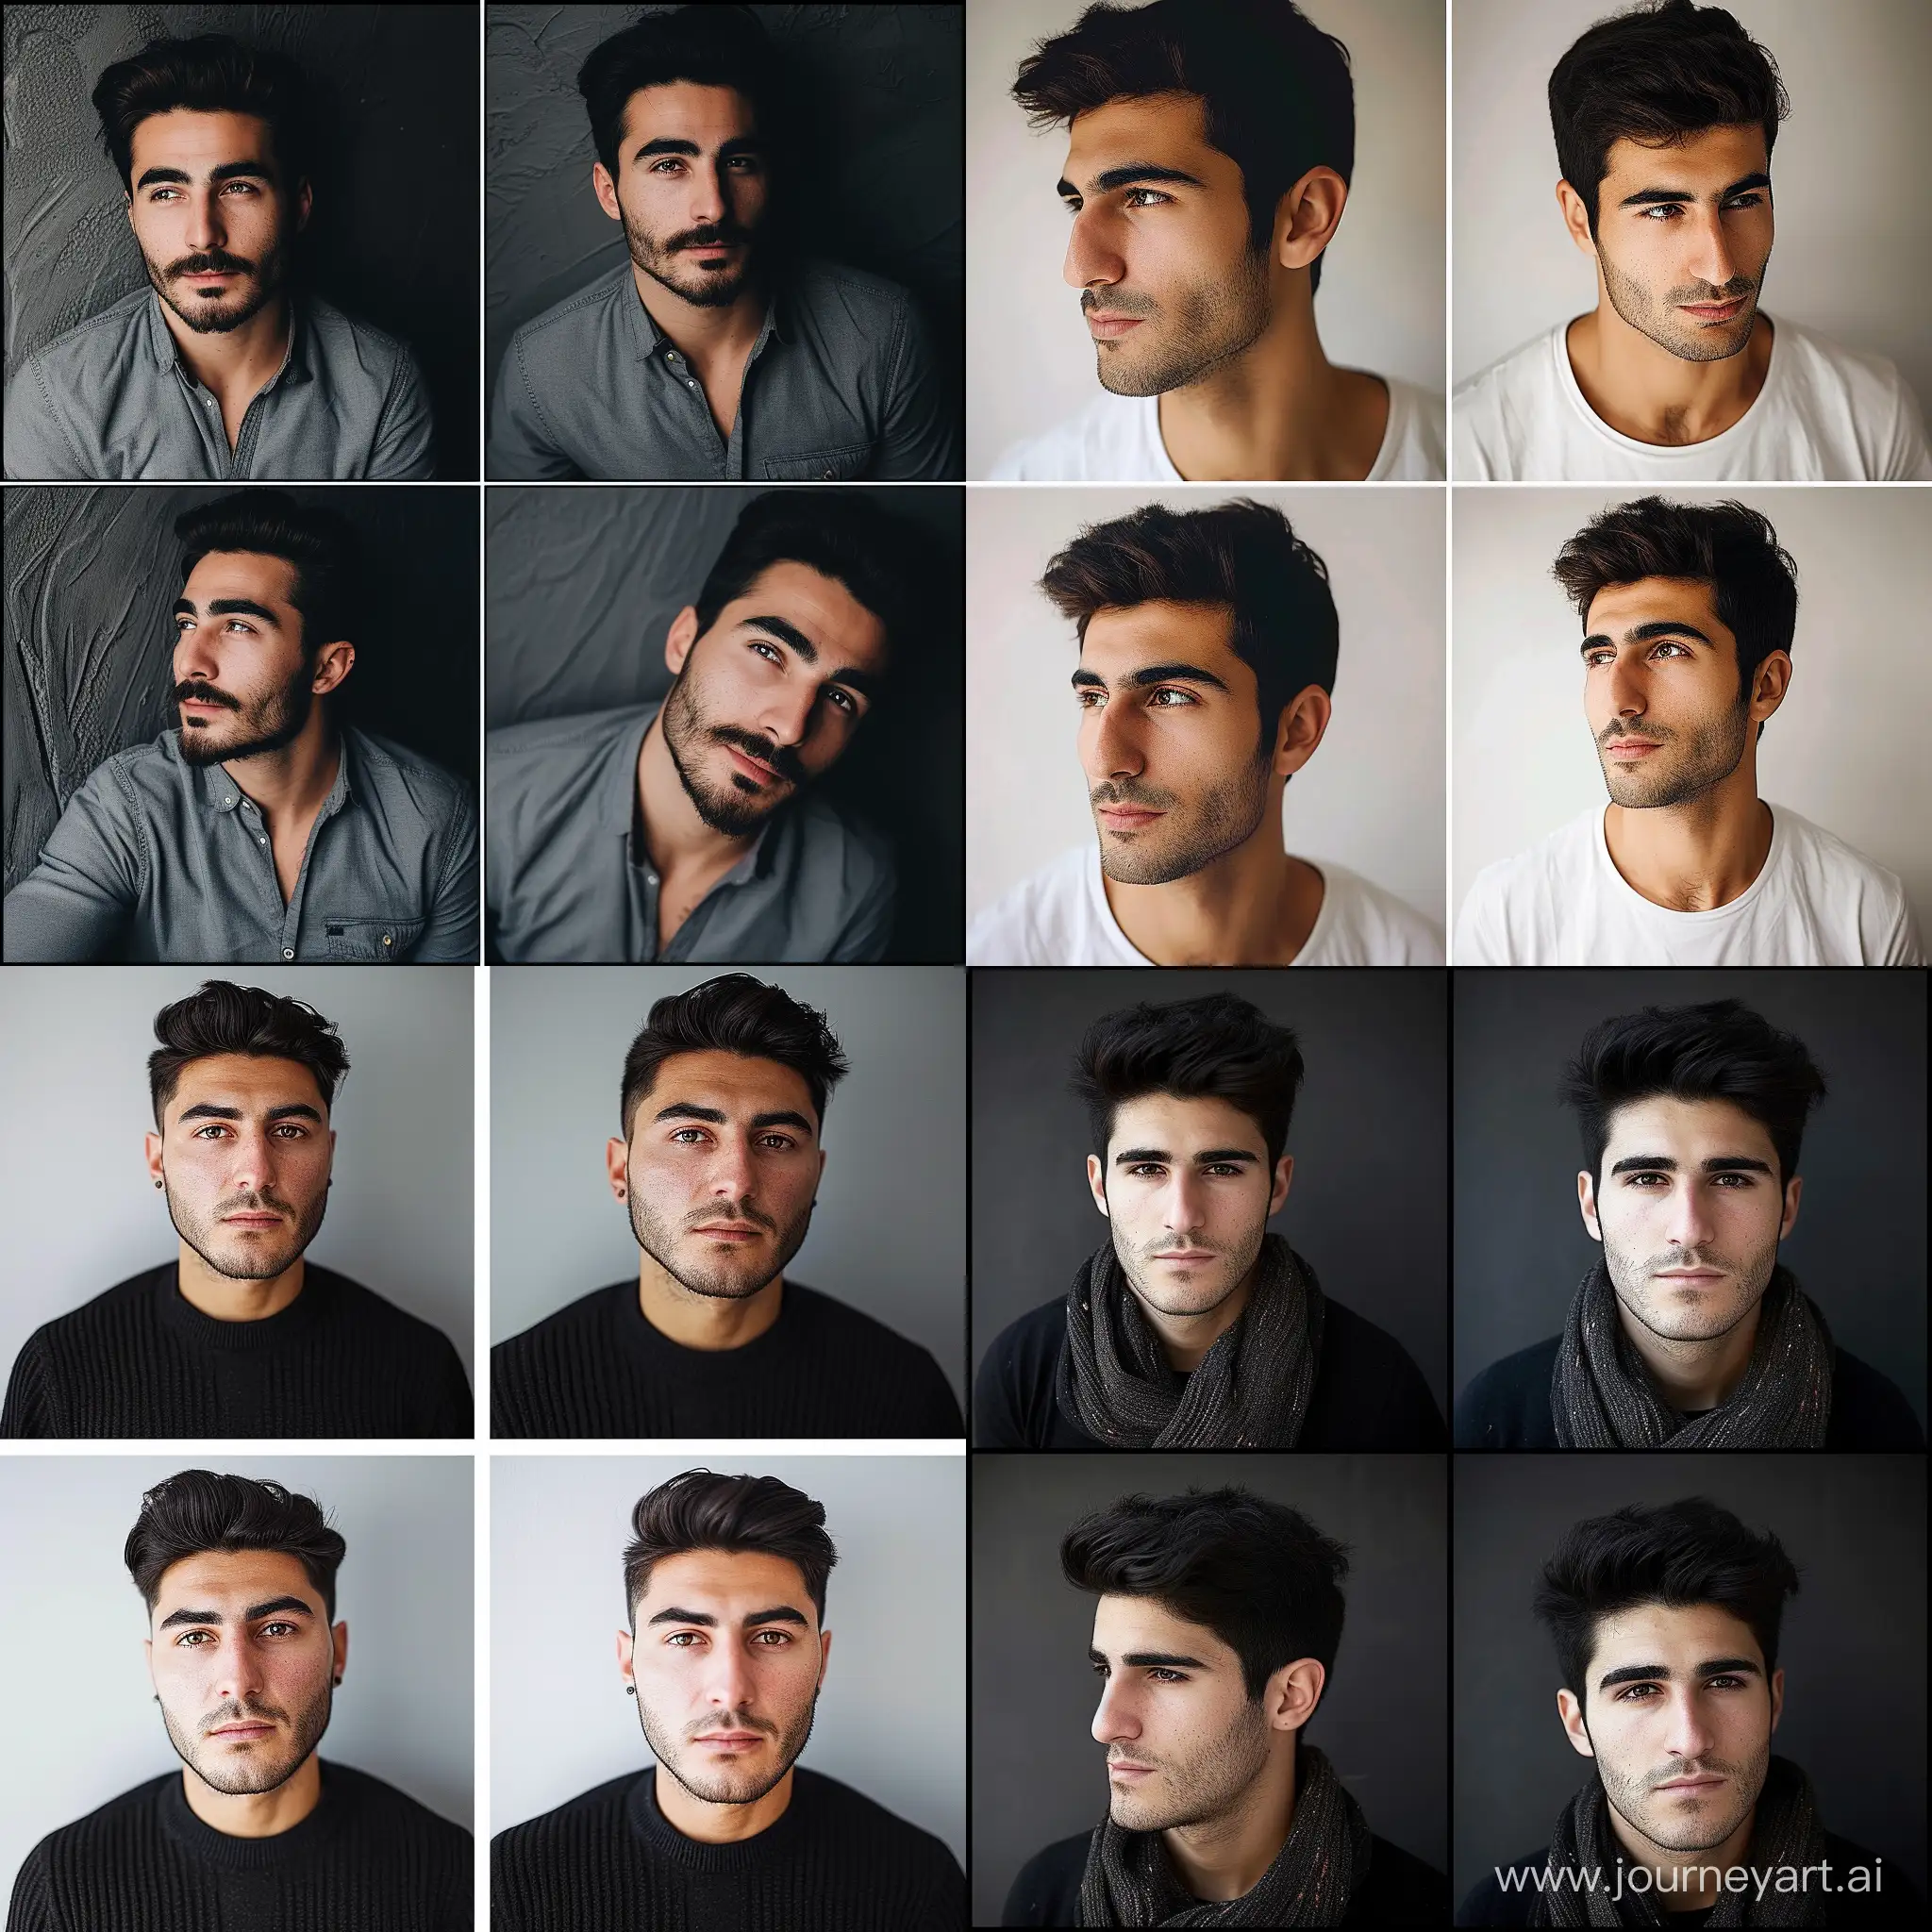 Handsome-27YearOld-Armenian-Man-Captivating-Portraits-in-4-Perspectives